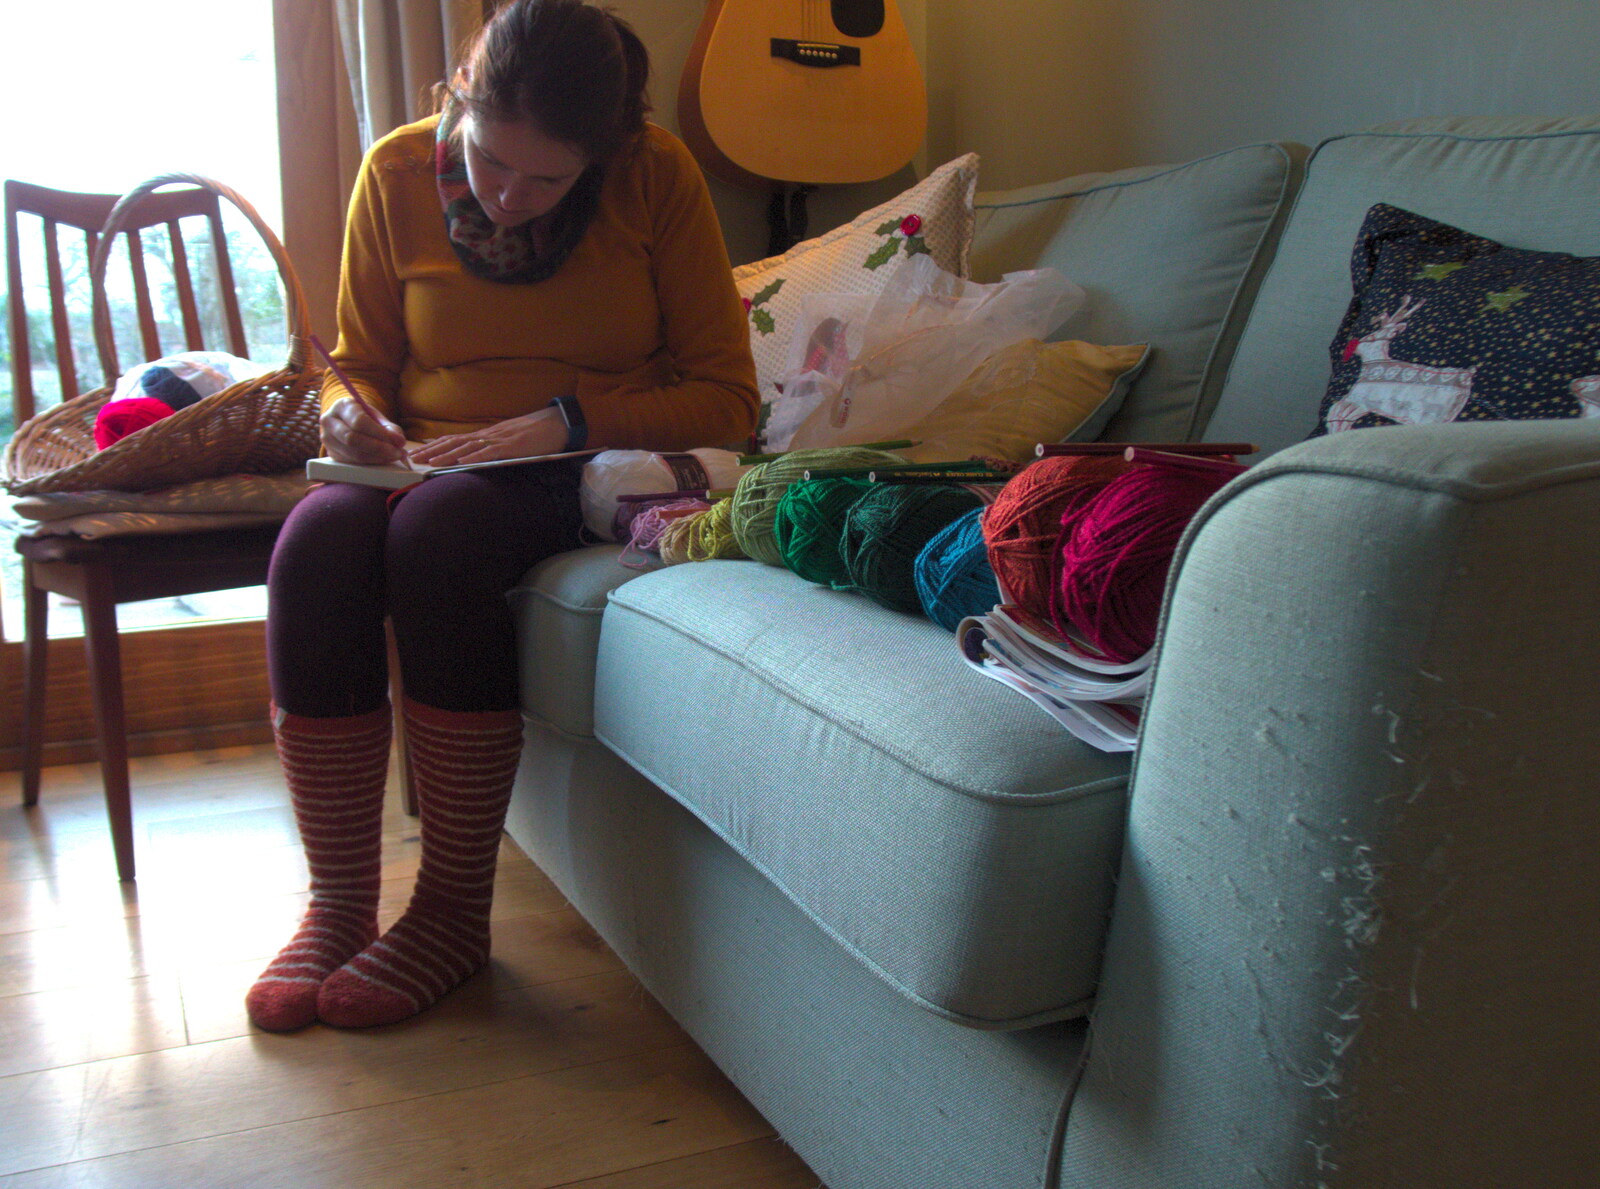 Isobel creates a crochet plan for a new blanket from New Year's Eve and Day, Brome, Suffolk - 1st January 2019